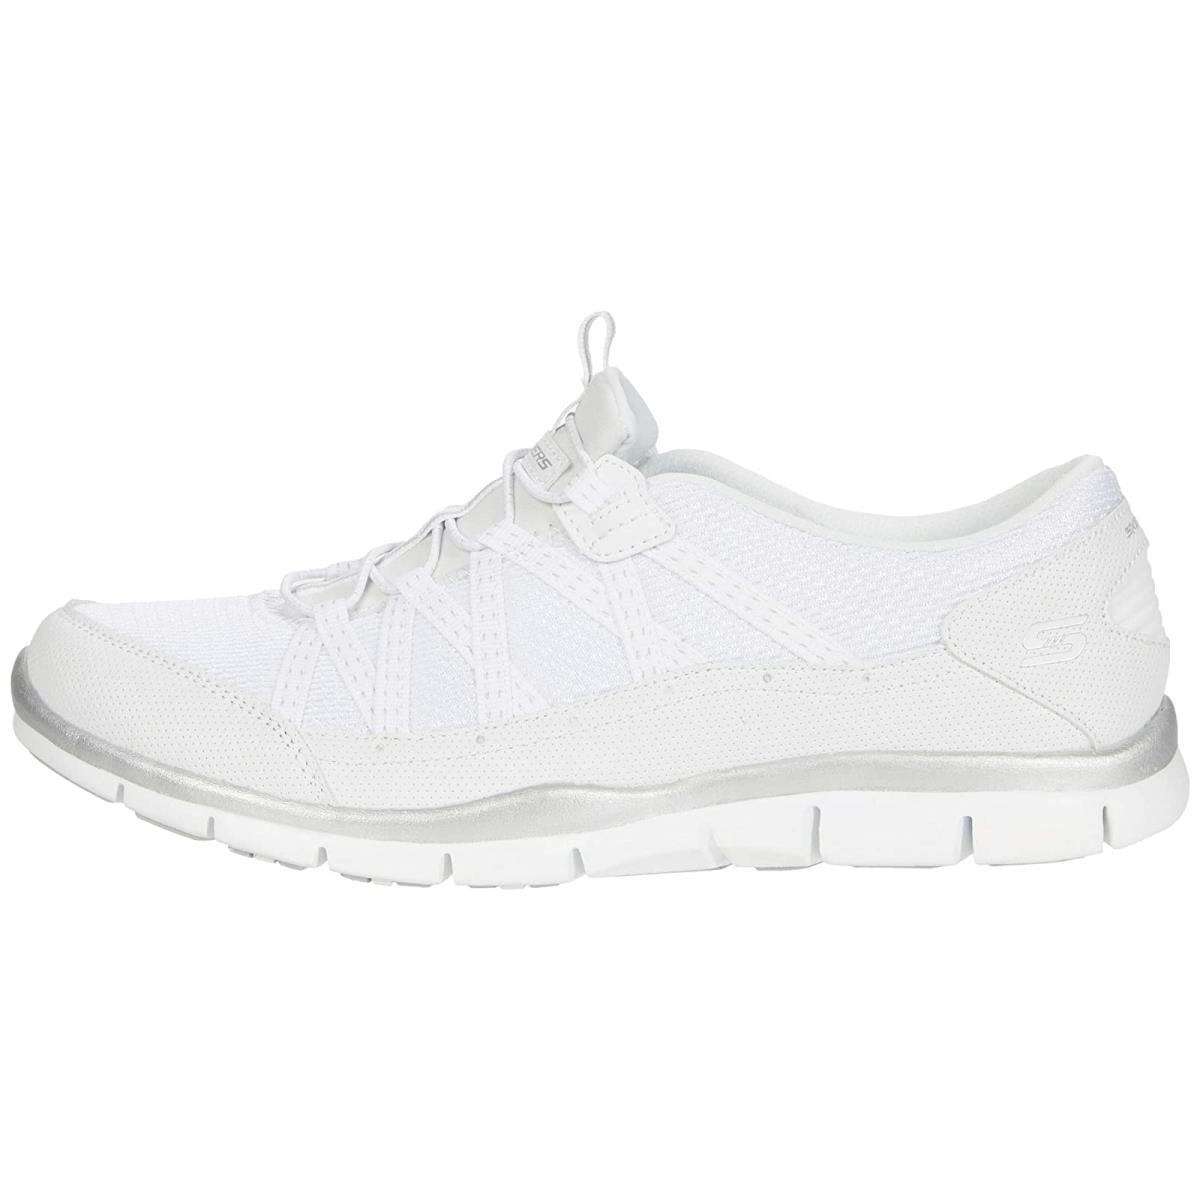 Skechers shoes  - White/Silver 2